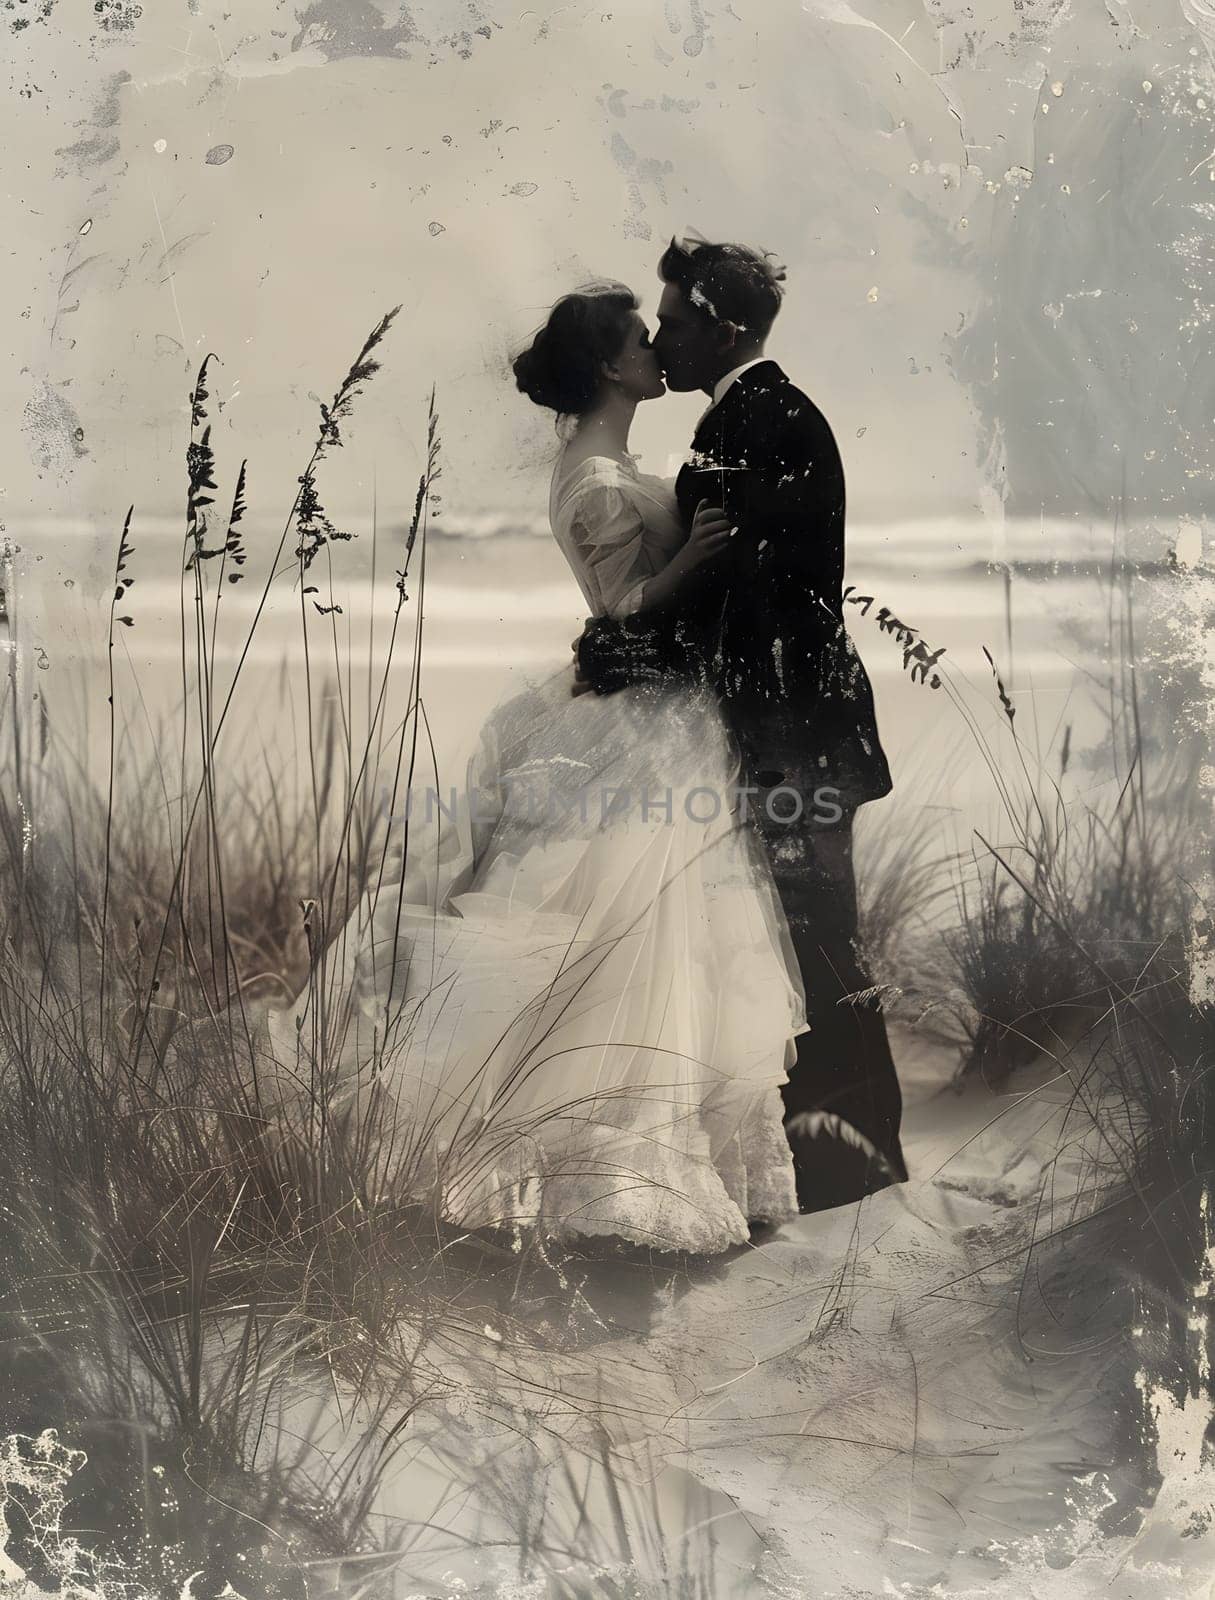 A bride and groom, elegantly dressed in vintage clothing, share a kiss on the beach captured in a stunning black and white monochrome photography